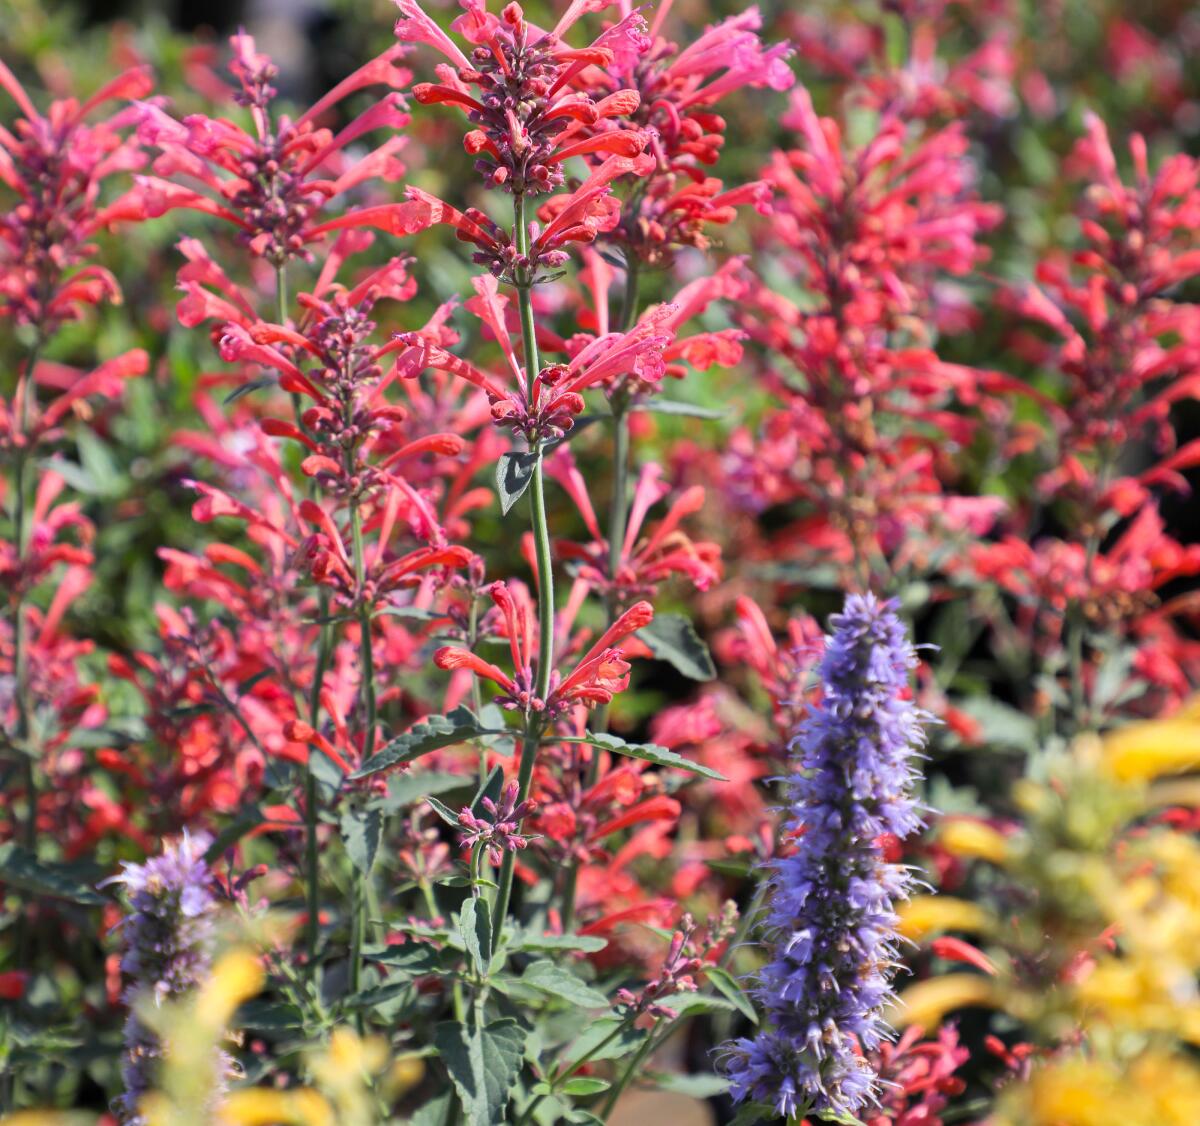 Agastache sunset is one of several agastache varieties available at Walter Andersen Nursery in Poway.